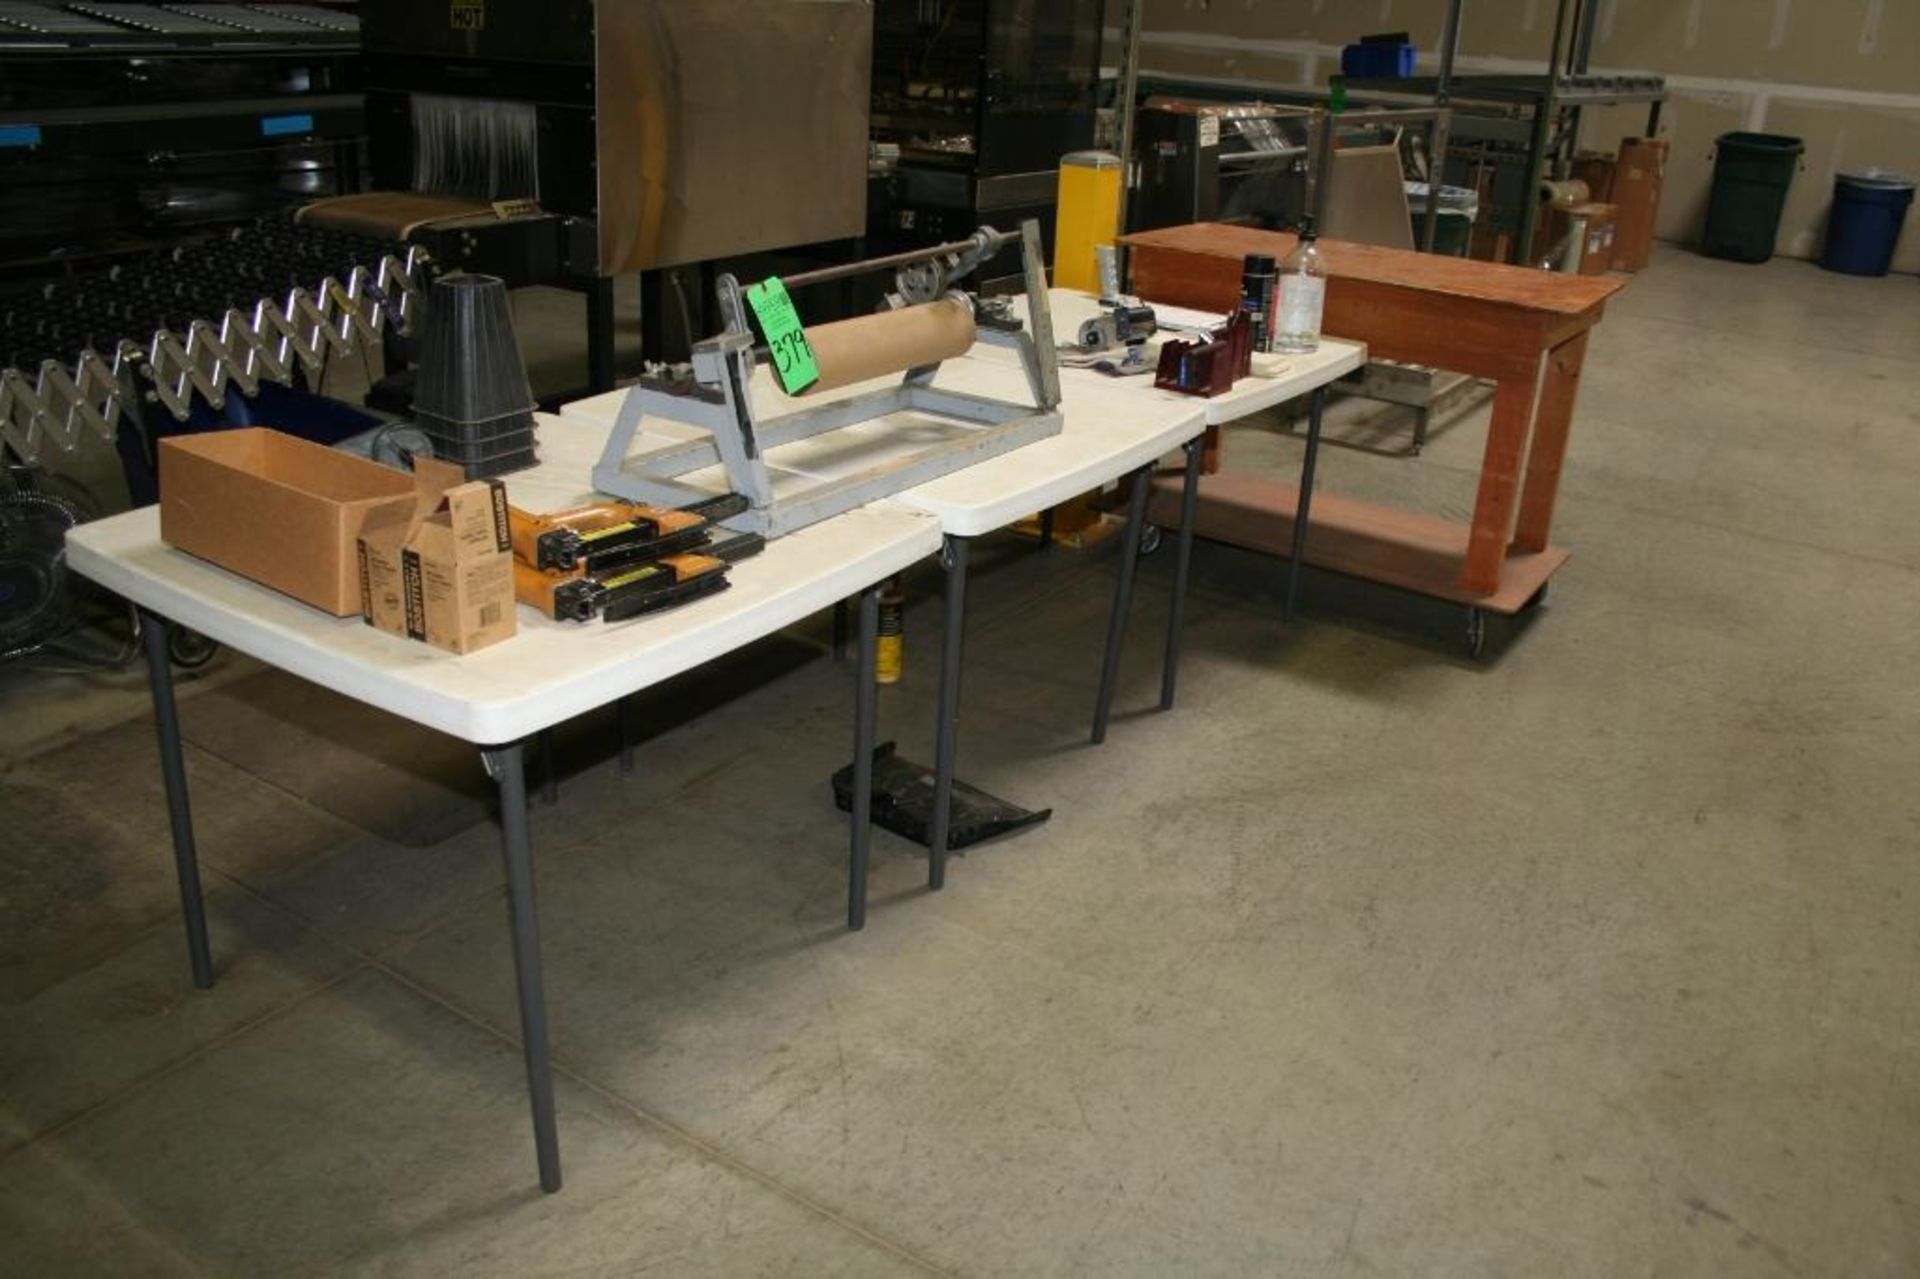 (3) Folding Tables 3'x3', (1) Wood Rolling Cart 2'x4', (2) Air Staplers, 24" Roll Measurer, and Misc